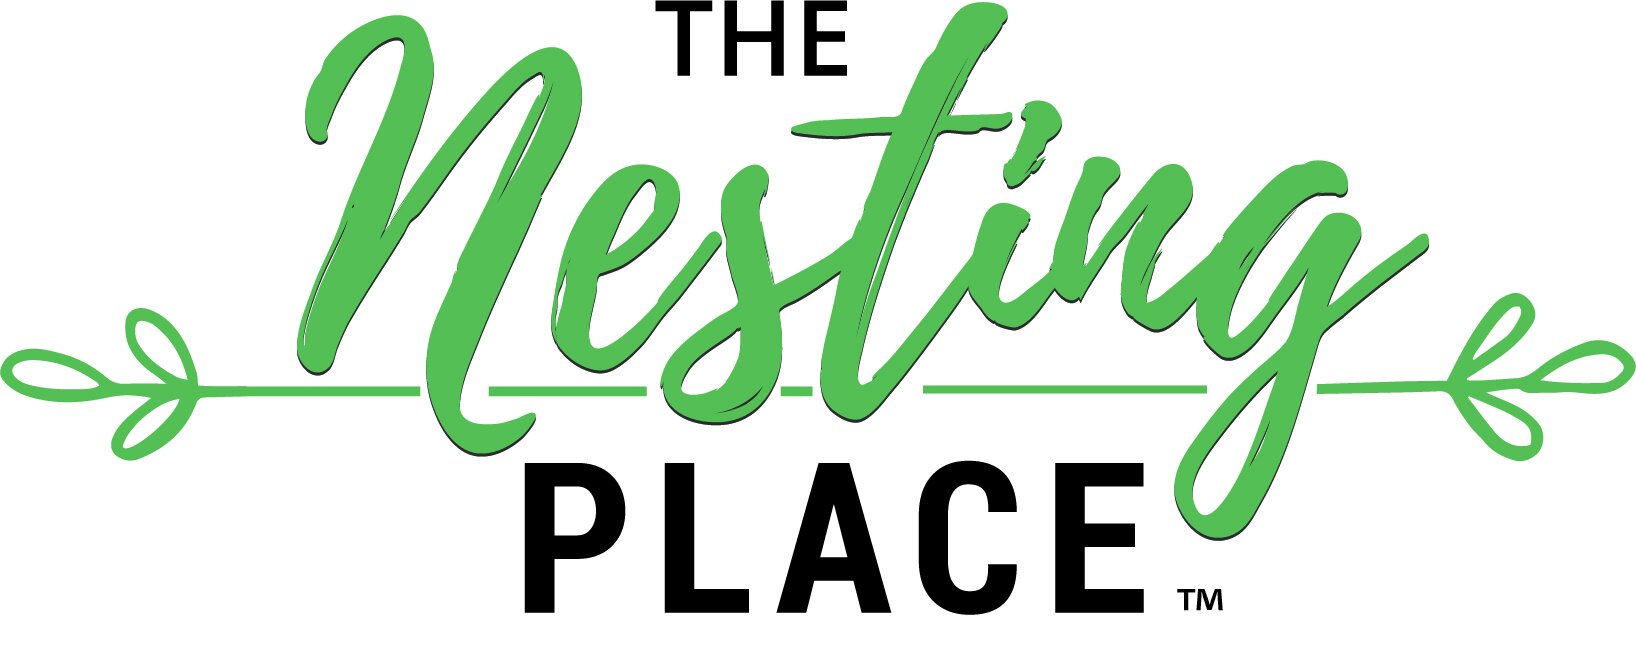 Nesting Place Logo Final with TM.jpg